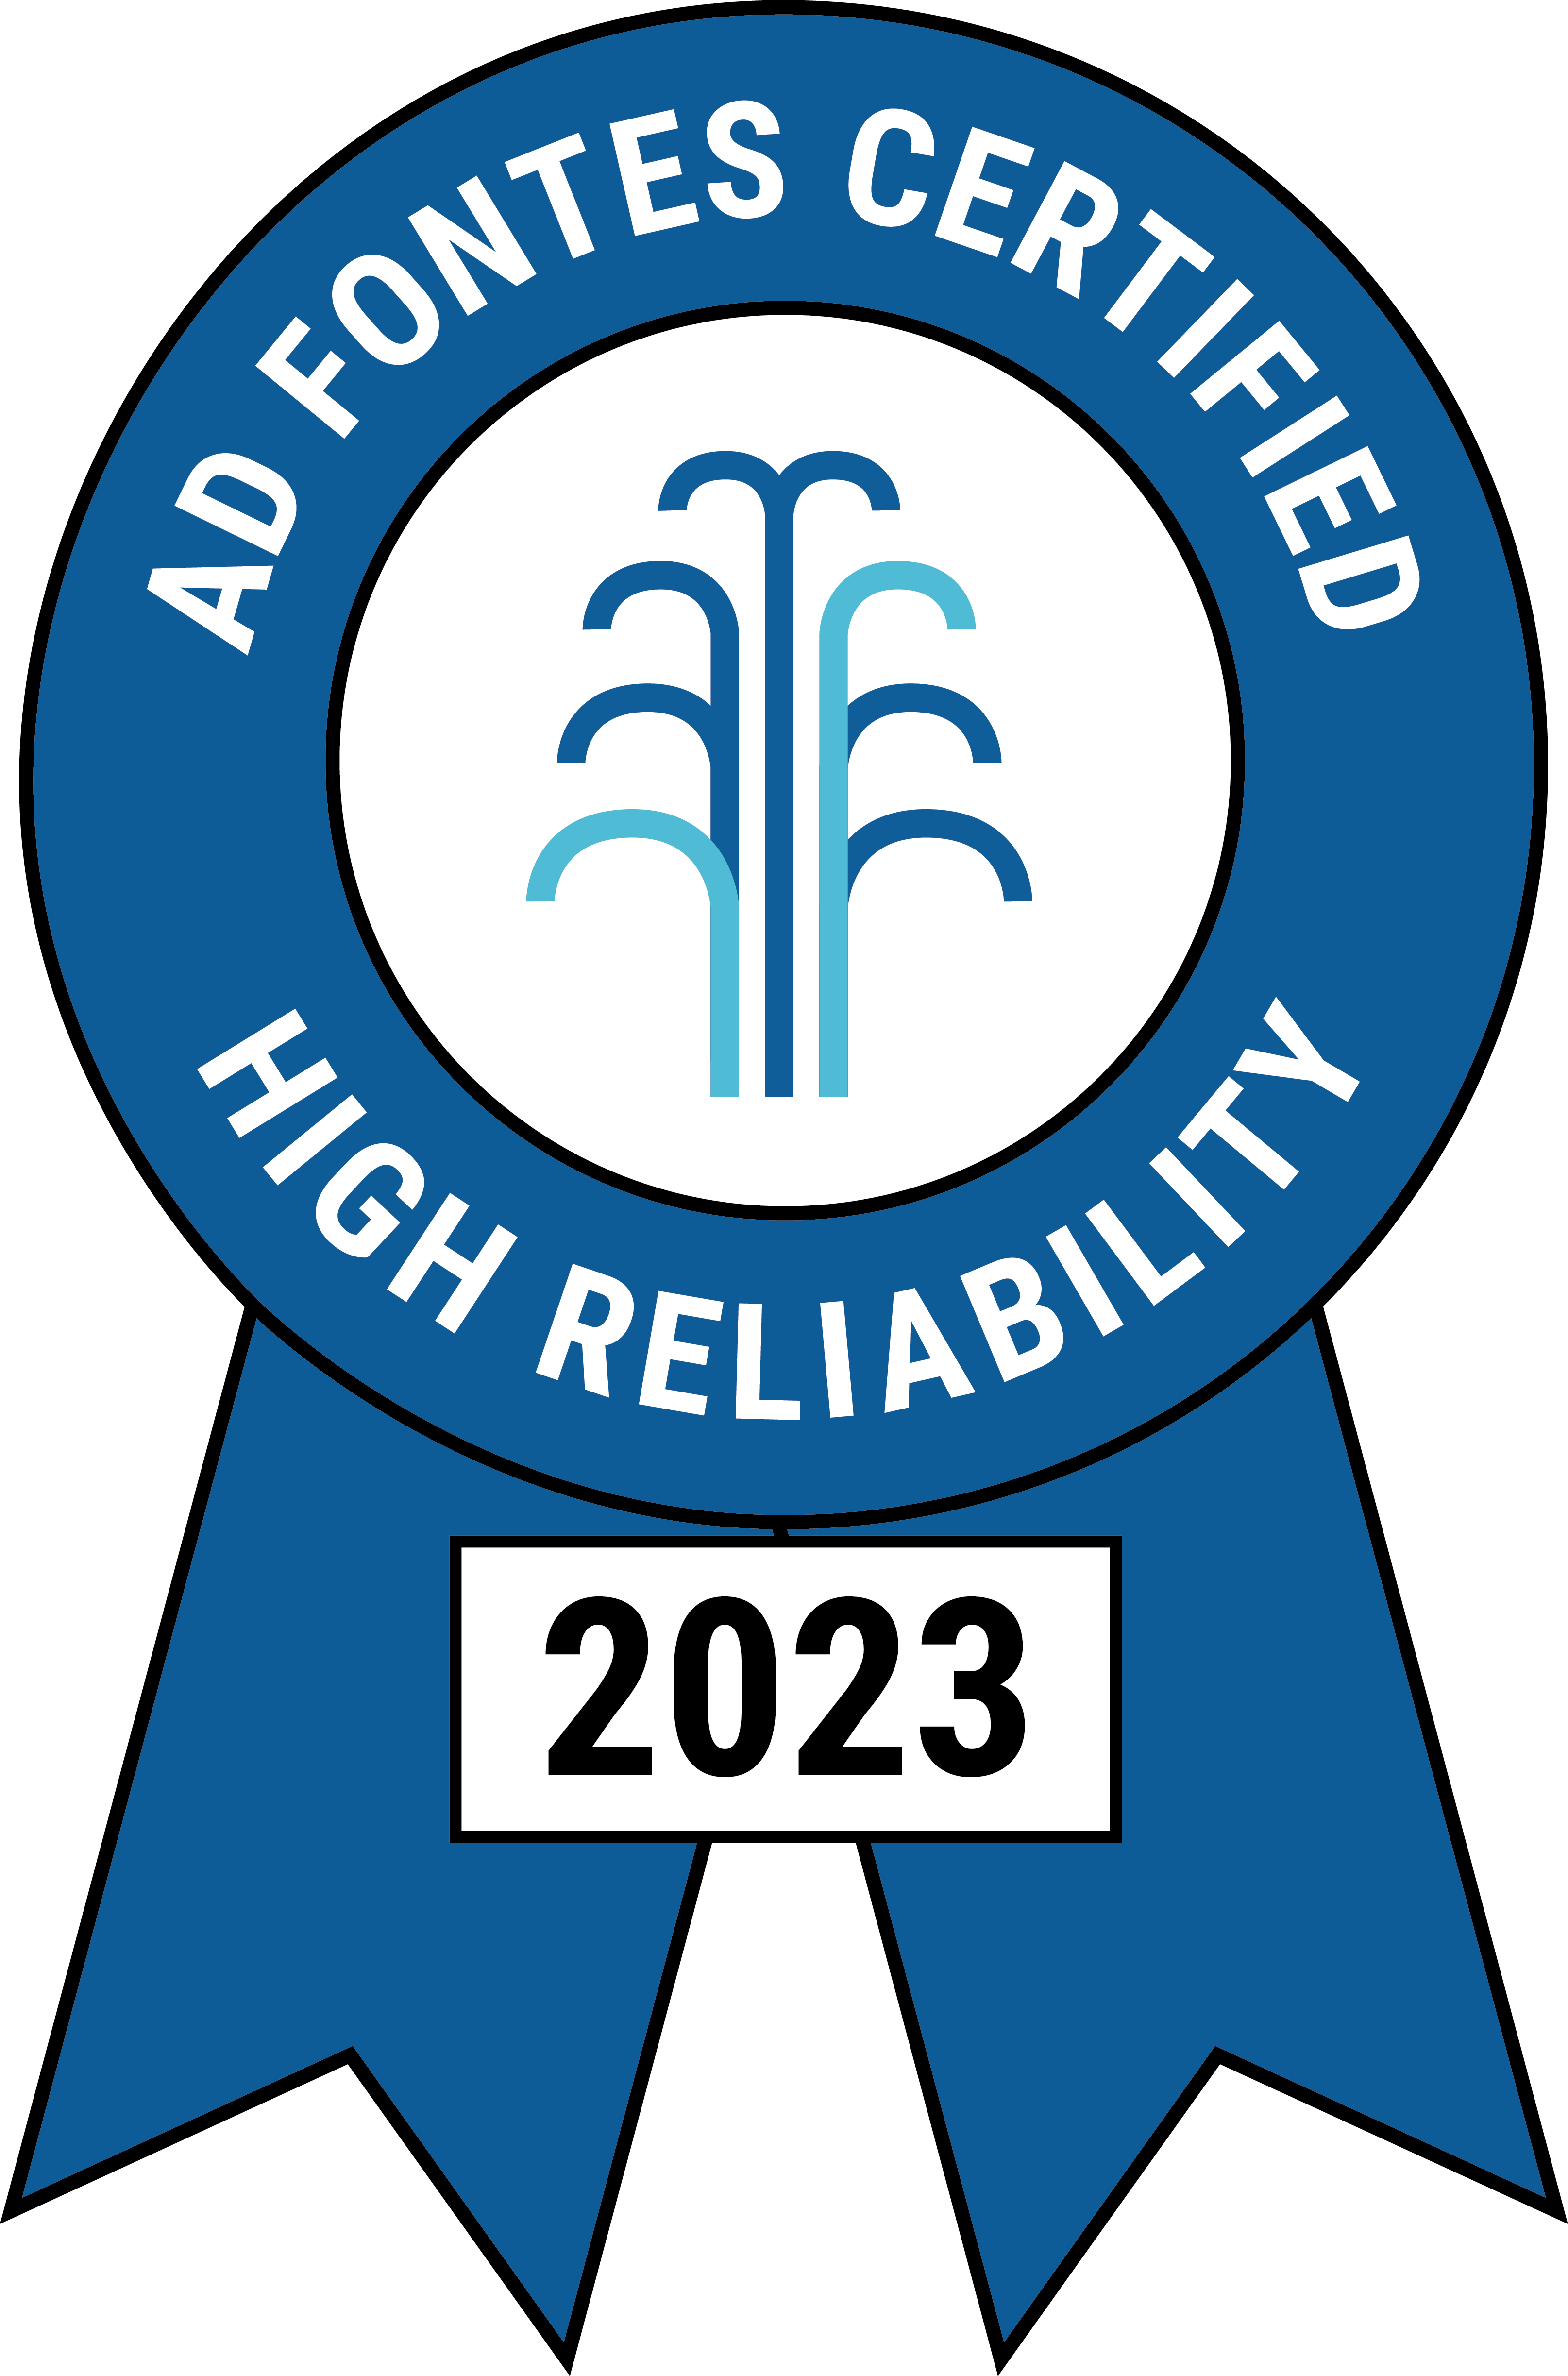 Ad Fontes Certified High Reliability badge